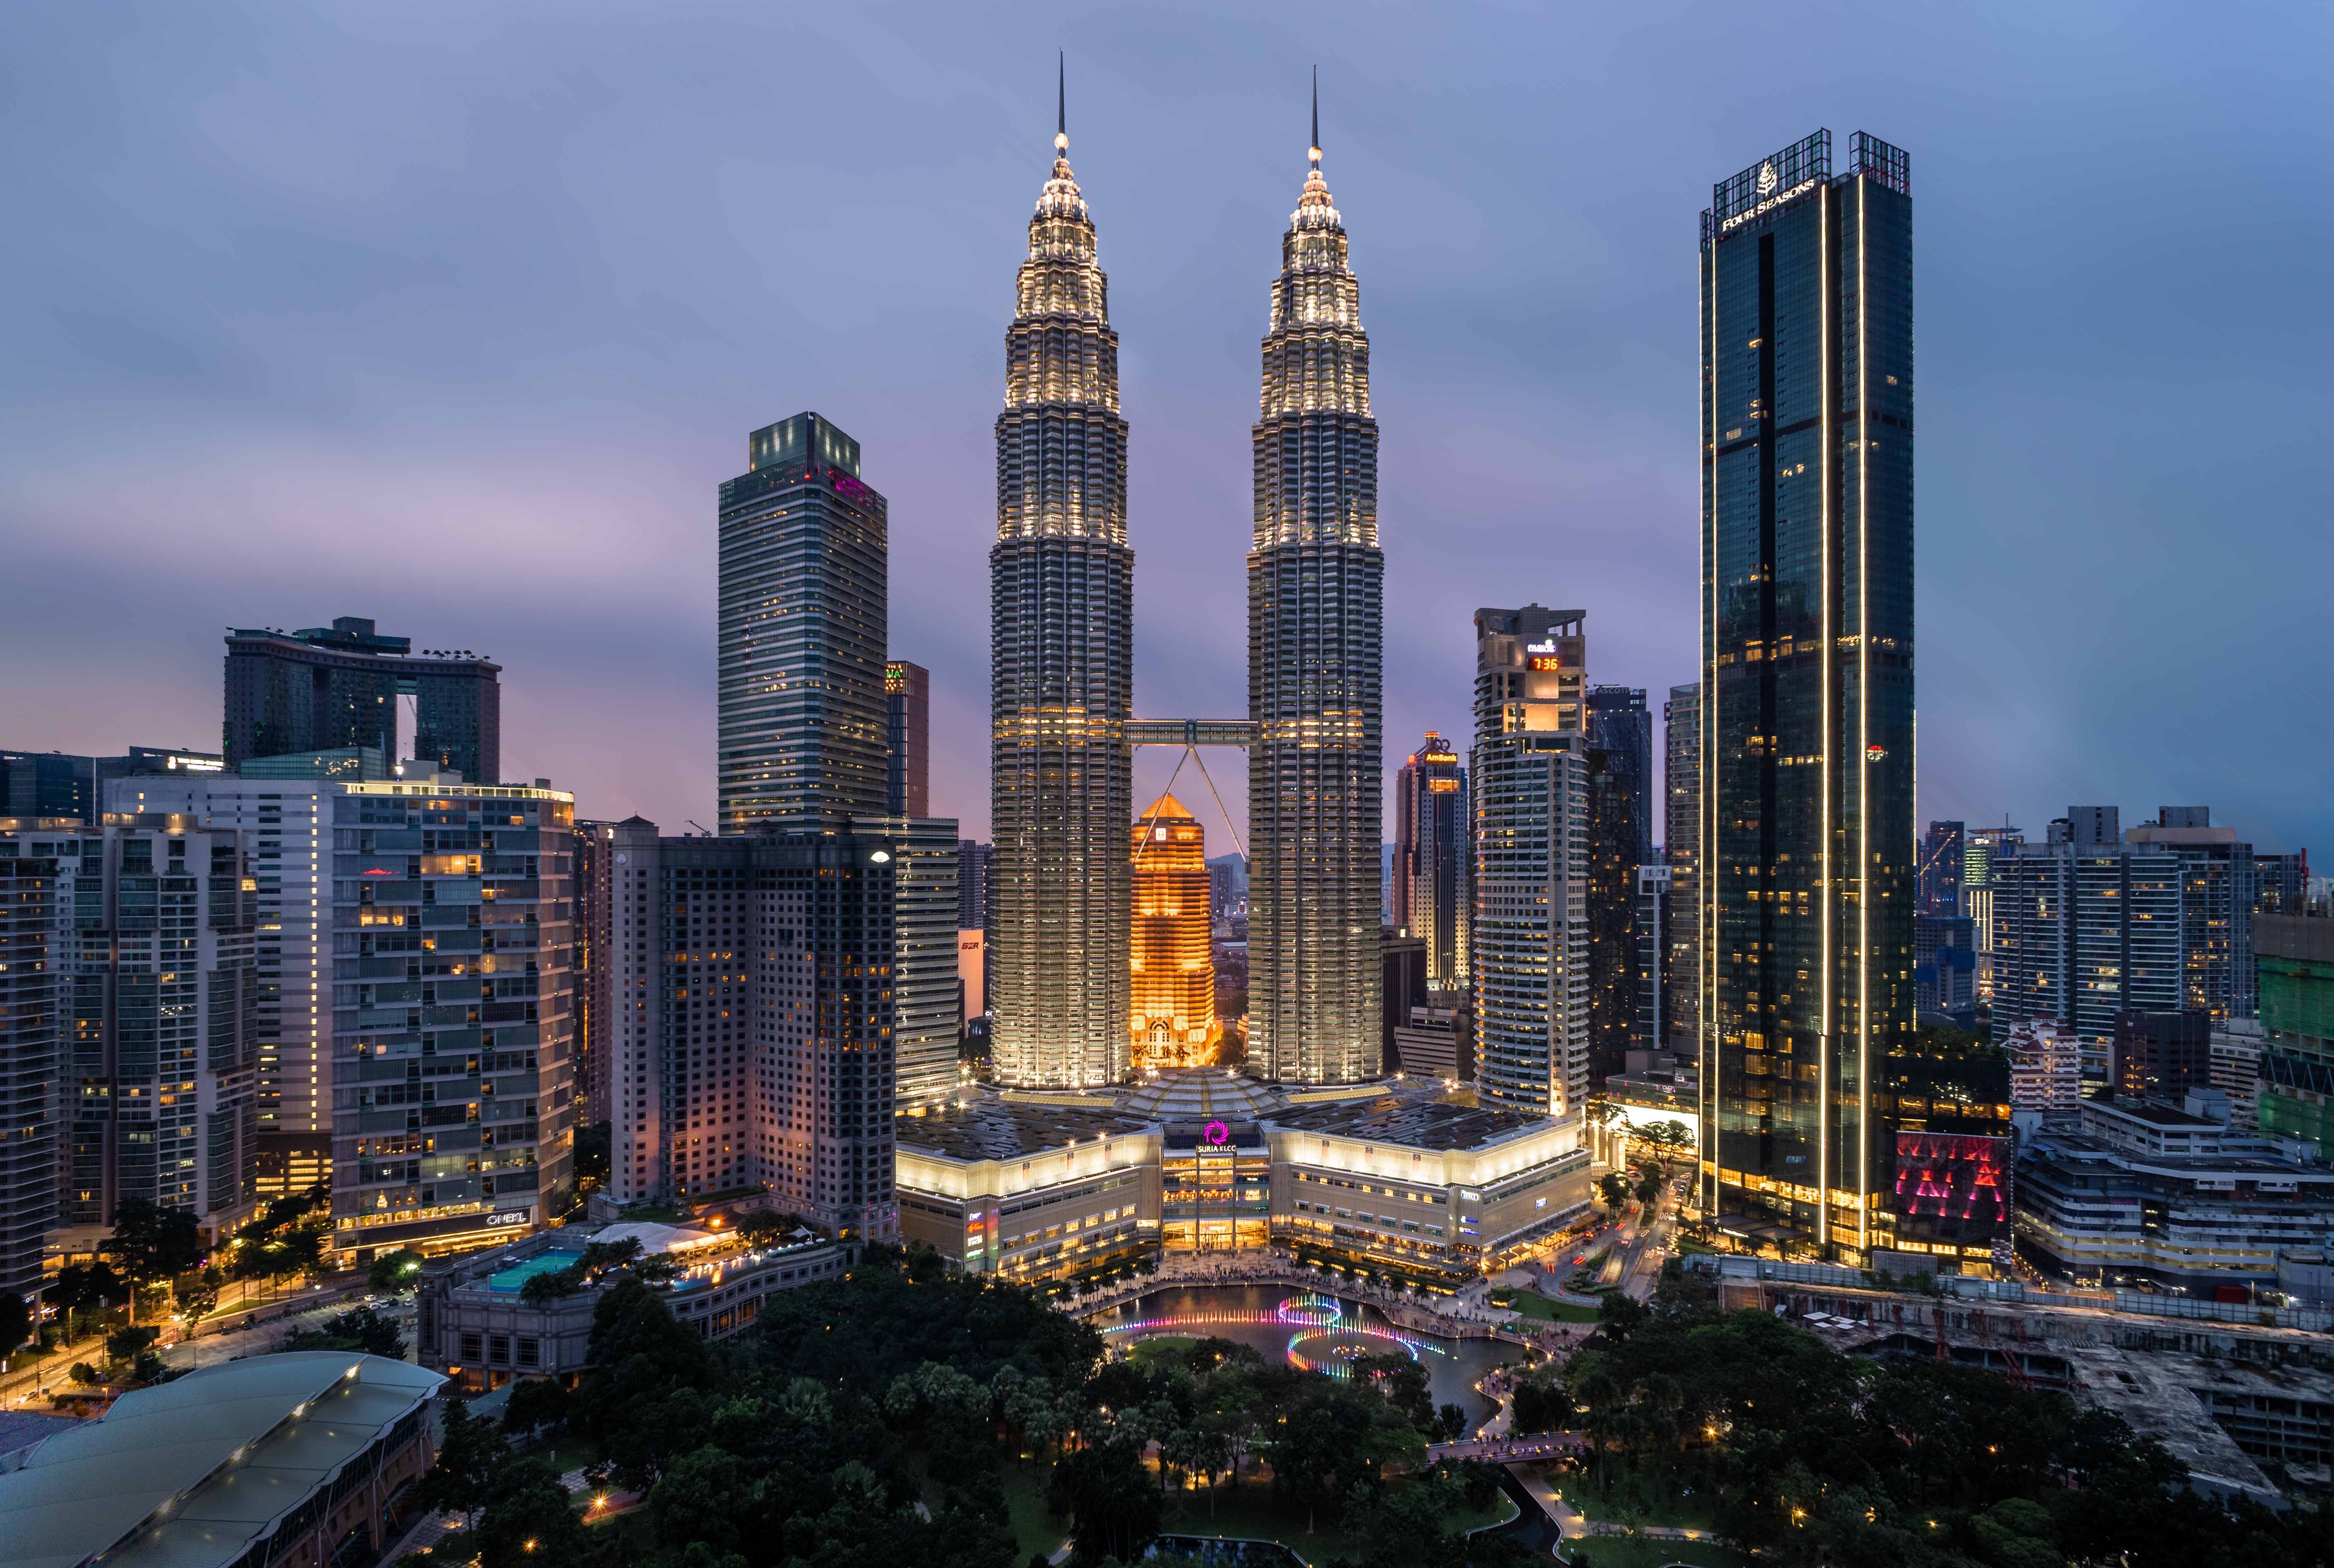 skyline at night of downtown Kuala Lumpur featuring the famous petronas towers in Malaysia cheapest places to live